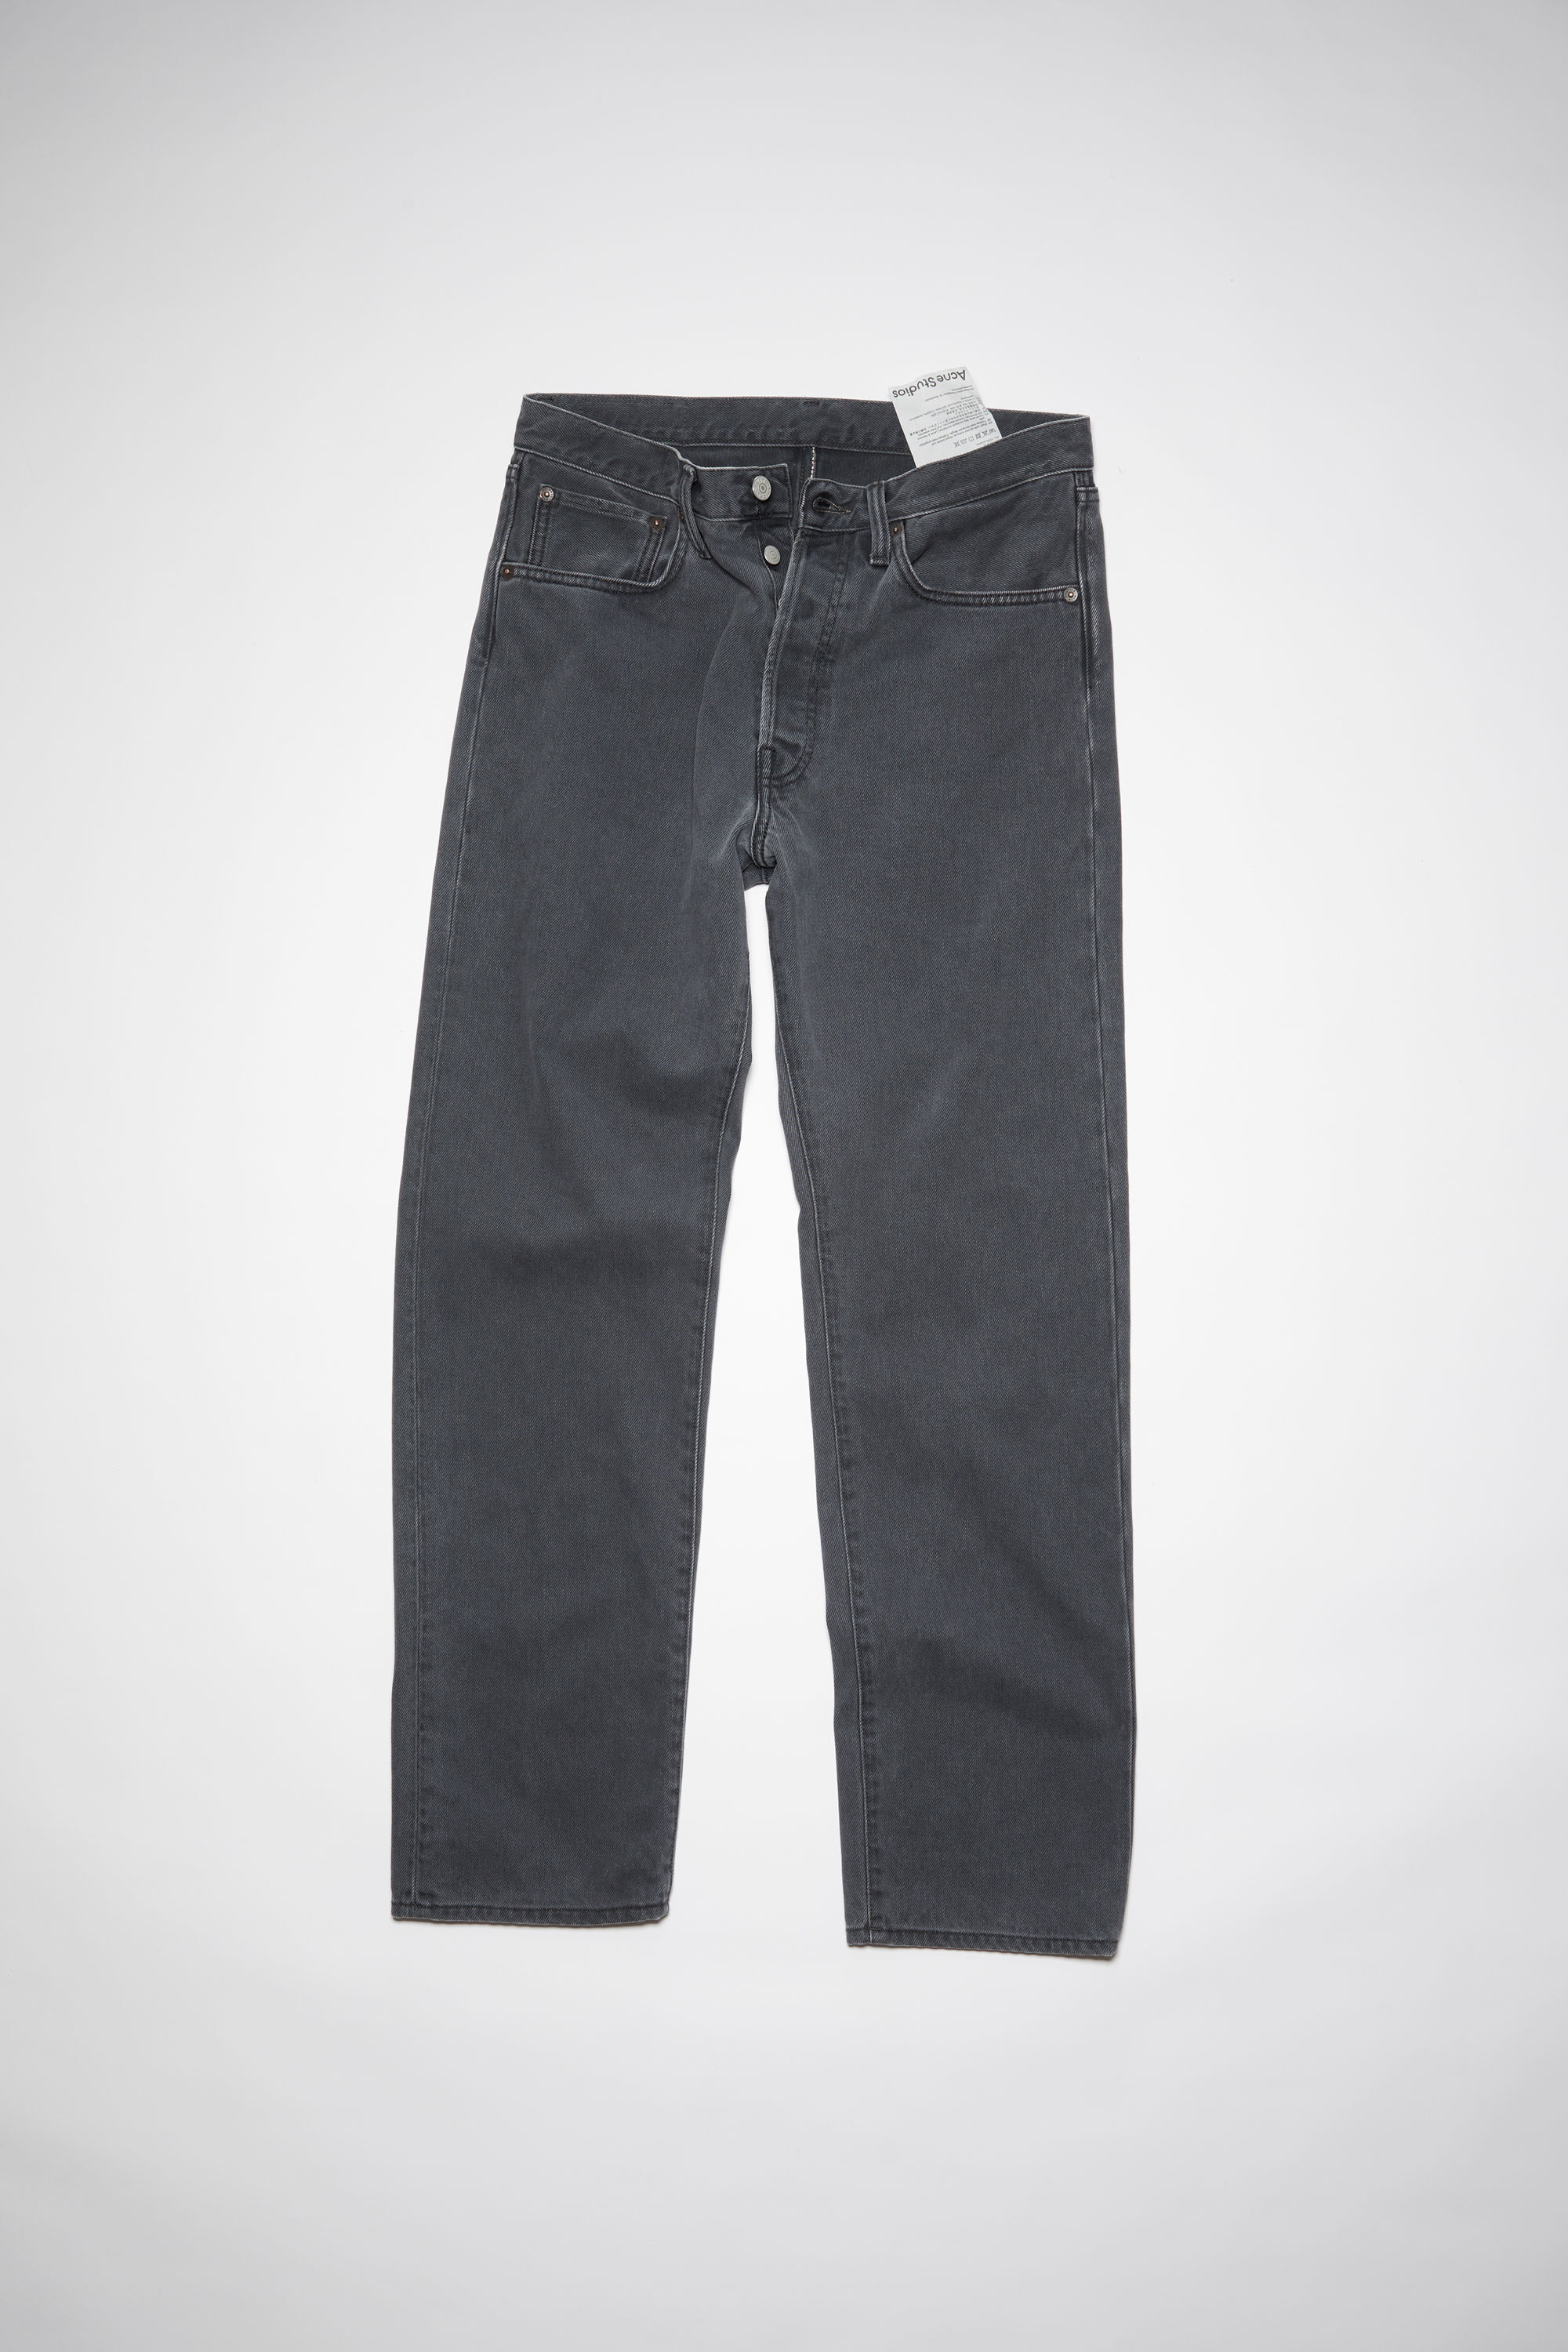 Acne Studios - Relaxed fit jeans - 2003 - Dark grey/grey